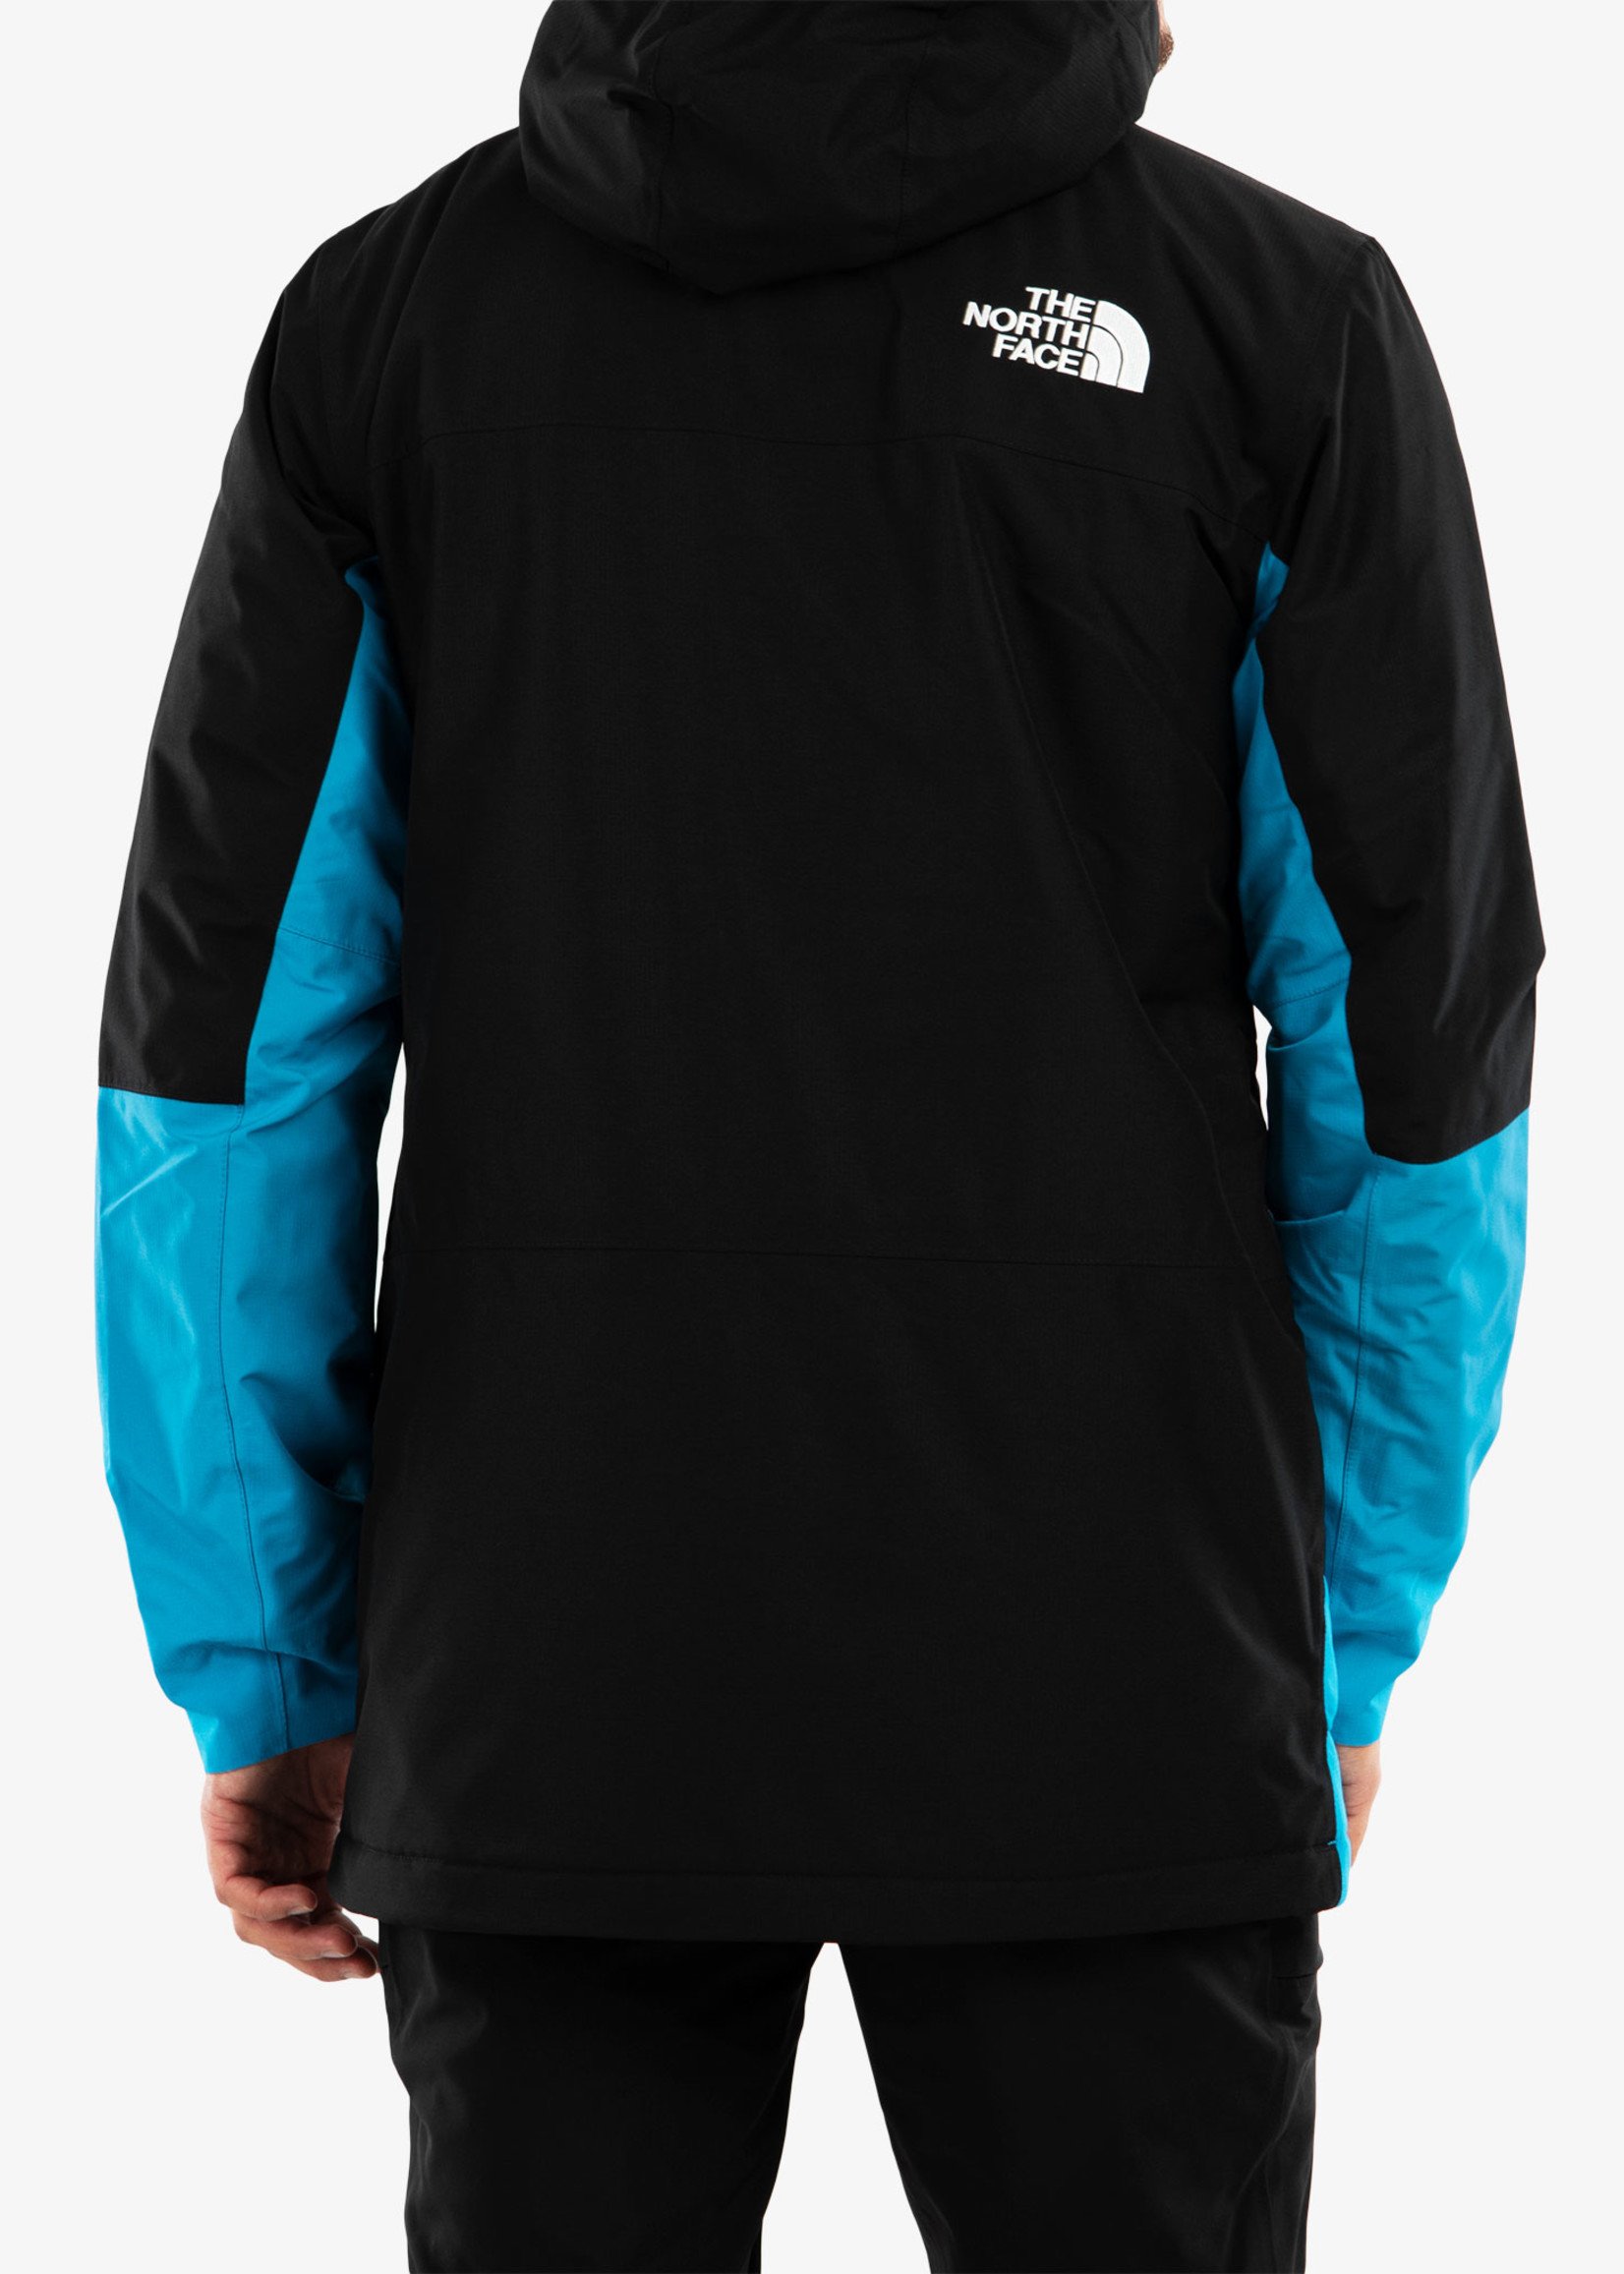 THE NORTH FACE TNF GOLDMILL JACKET